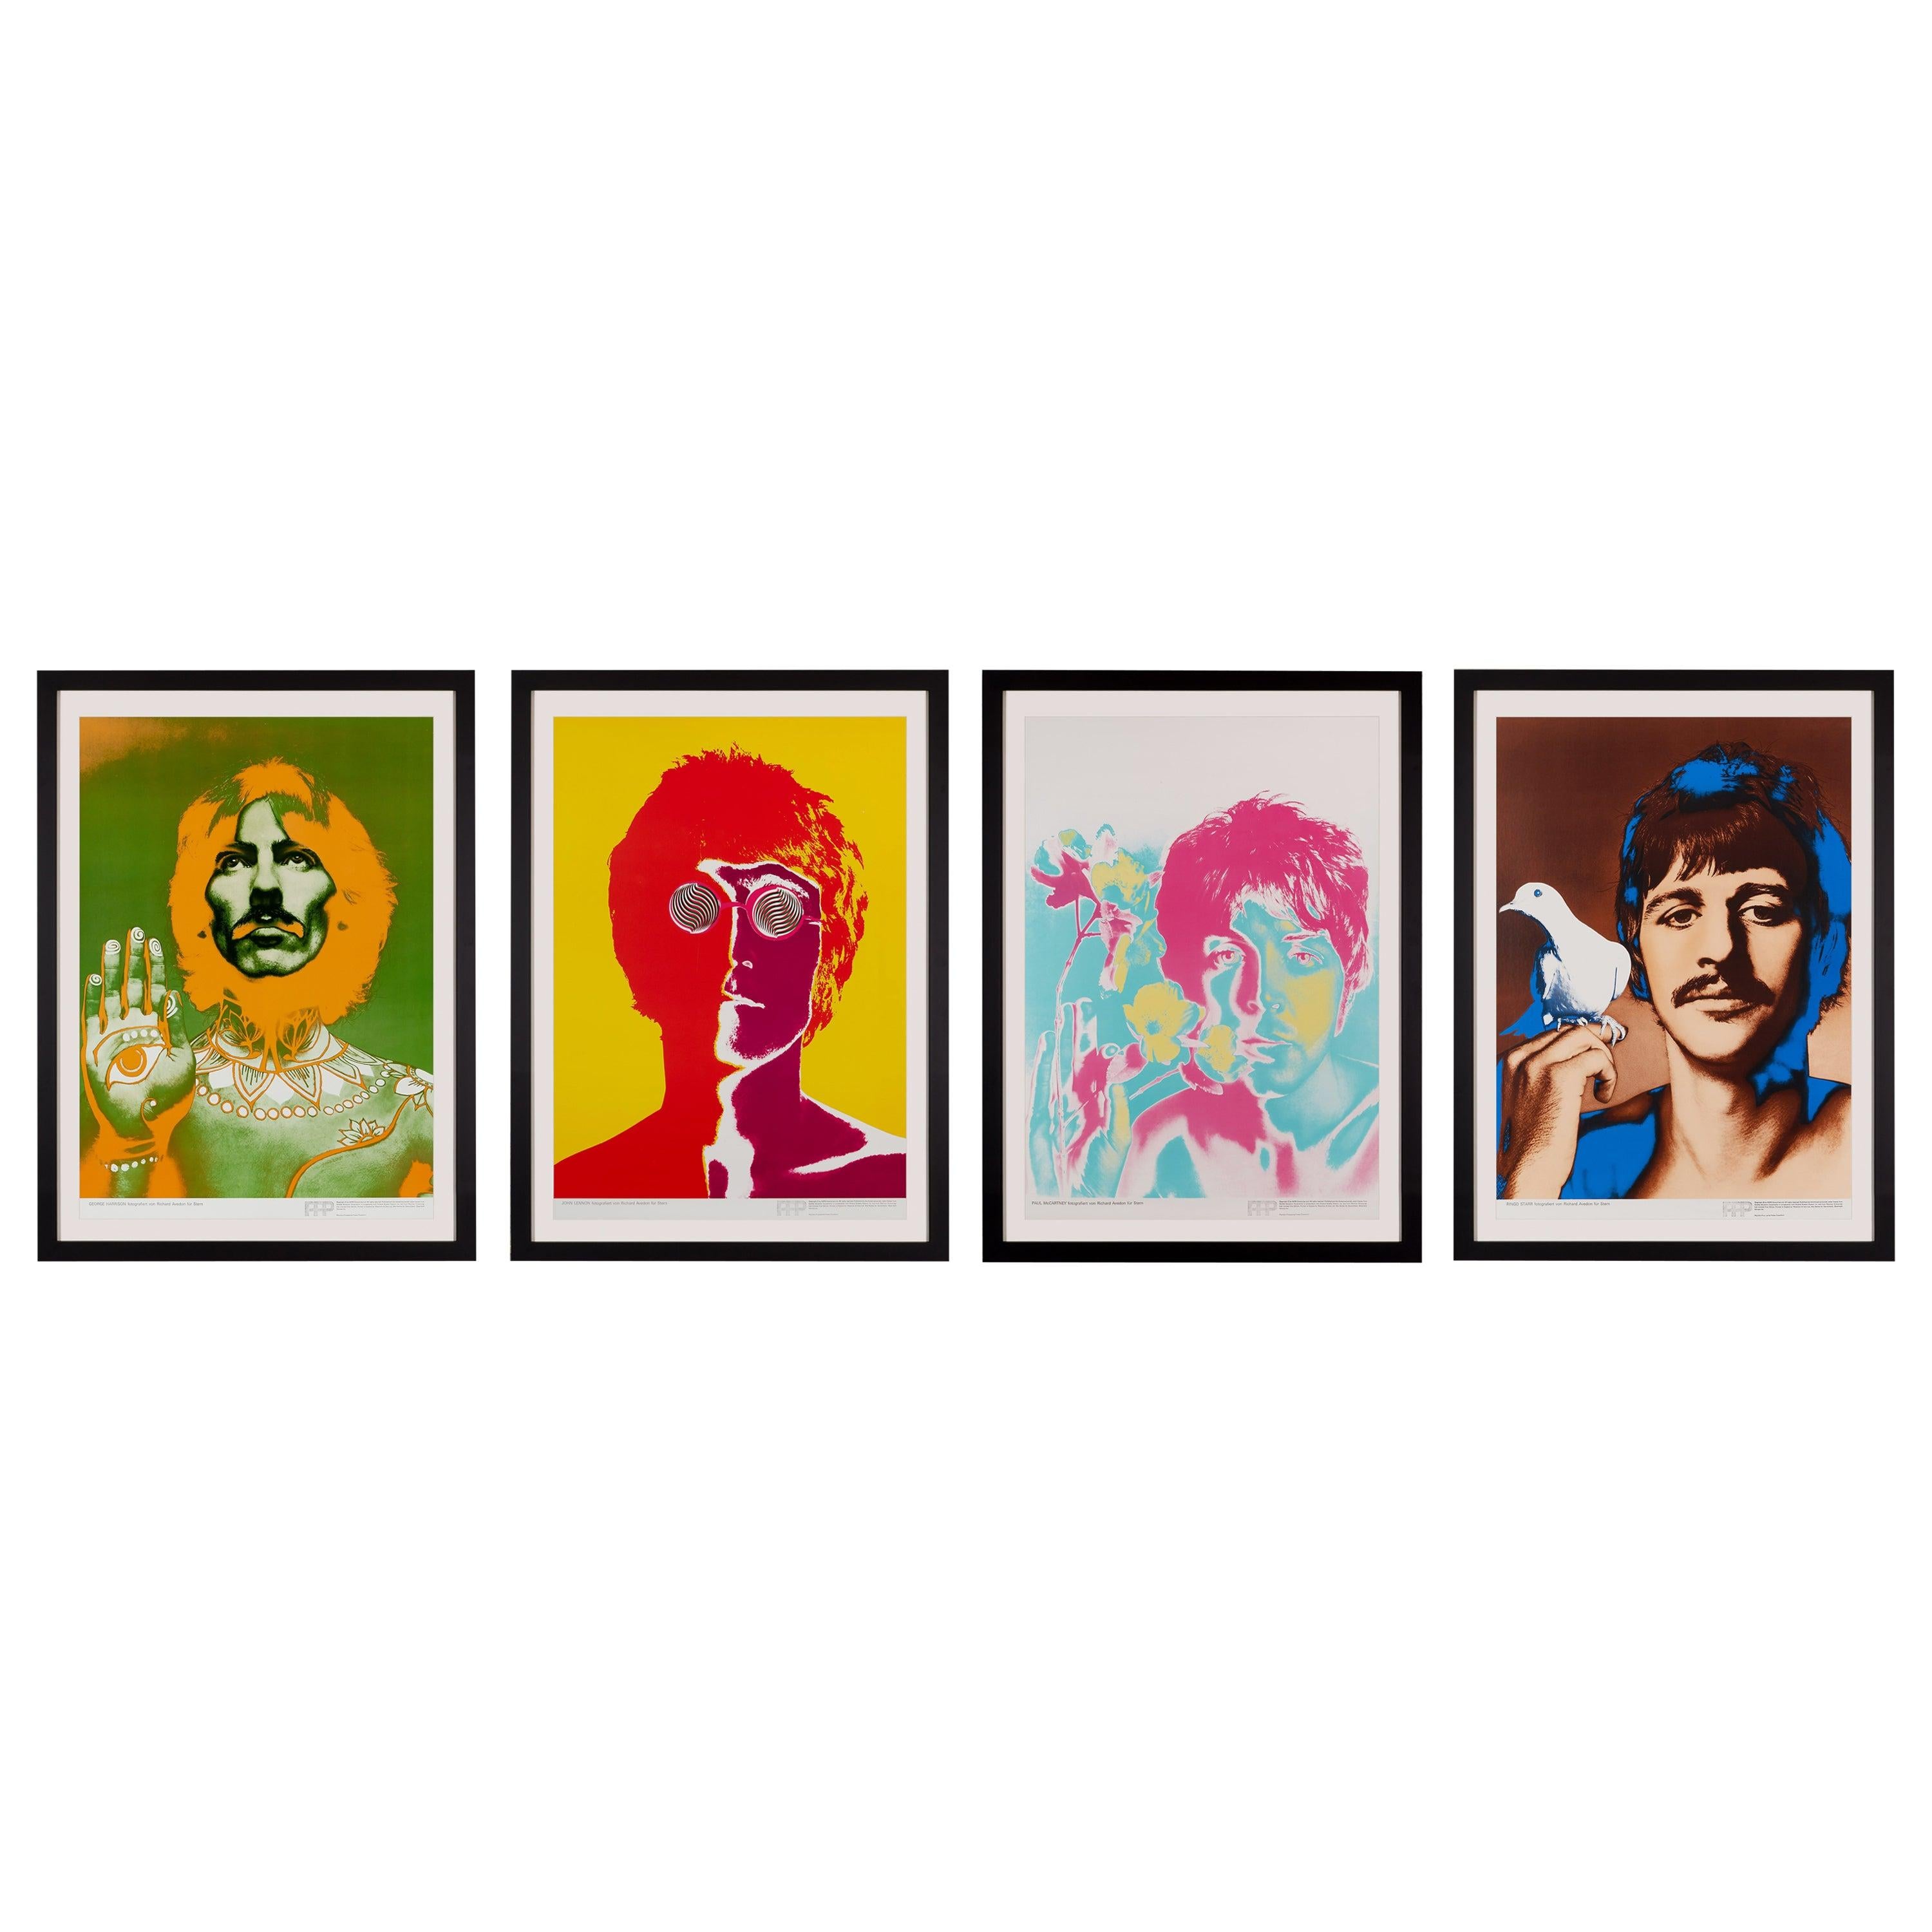 Complete set of five promotional posters
Measures: Portraits 27 x 18¾ in. (68.5 x 47.5 cm.); Banner 14½ x 40 in. (37 x 101.5 cm.)
Printed in England by Waterlow & Sons Limited for Stern Magazine, Germany

Beatles manager Brian Epstein commissioned